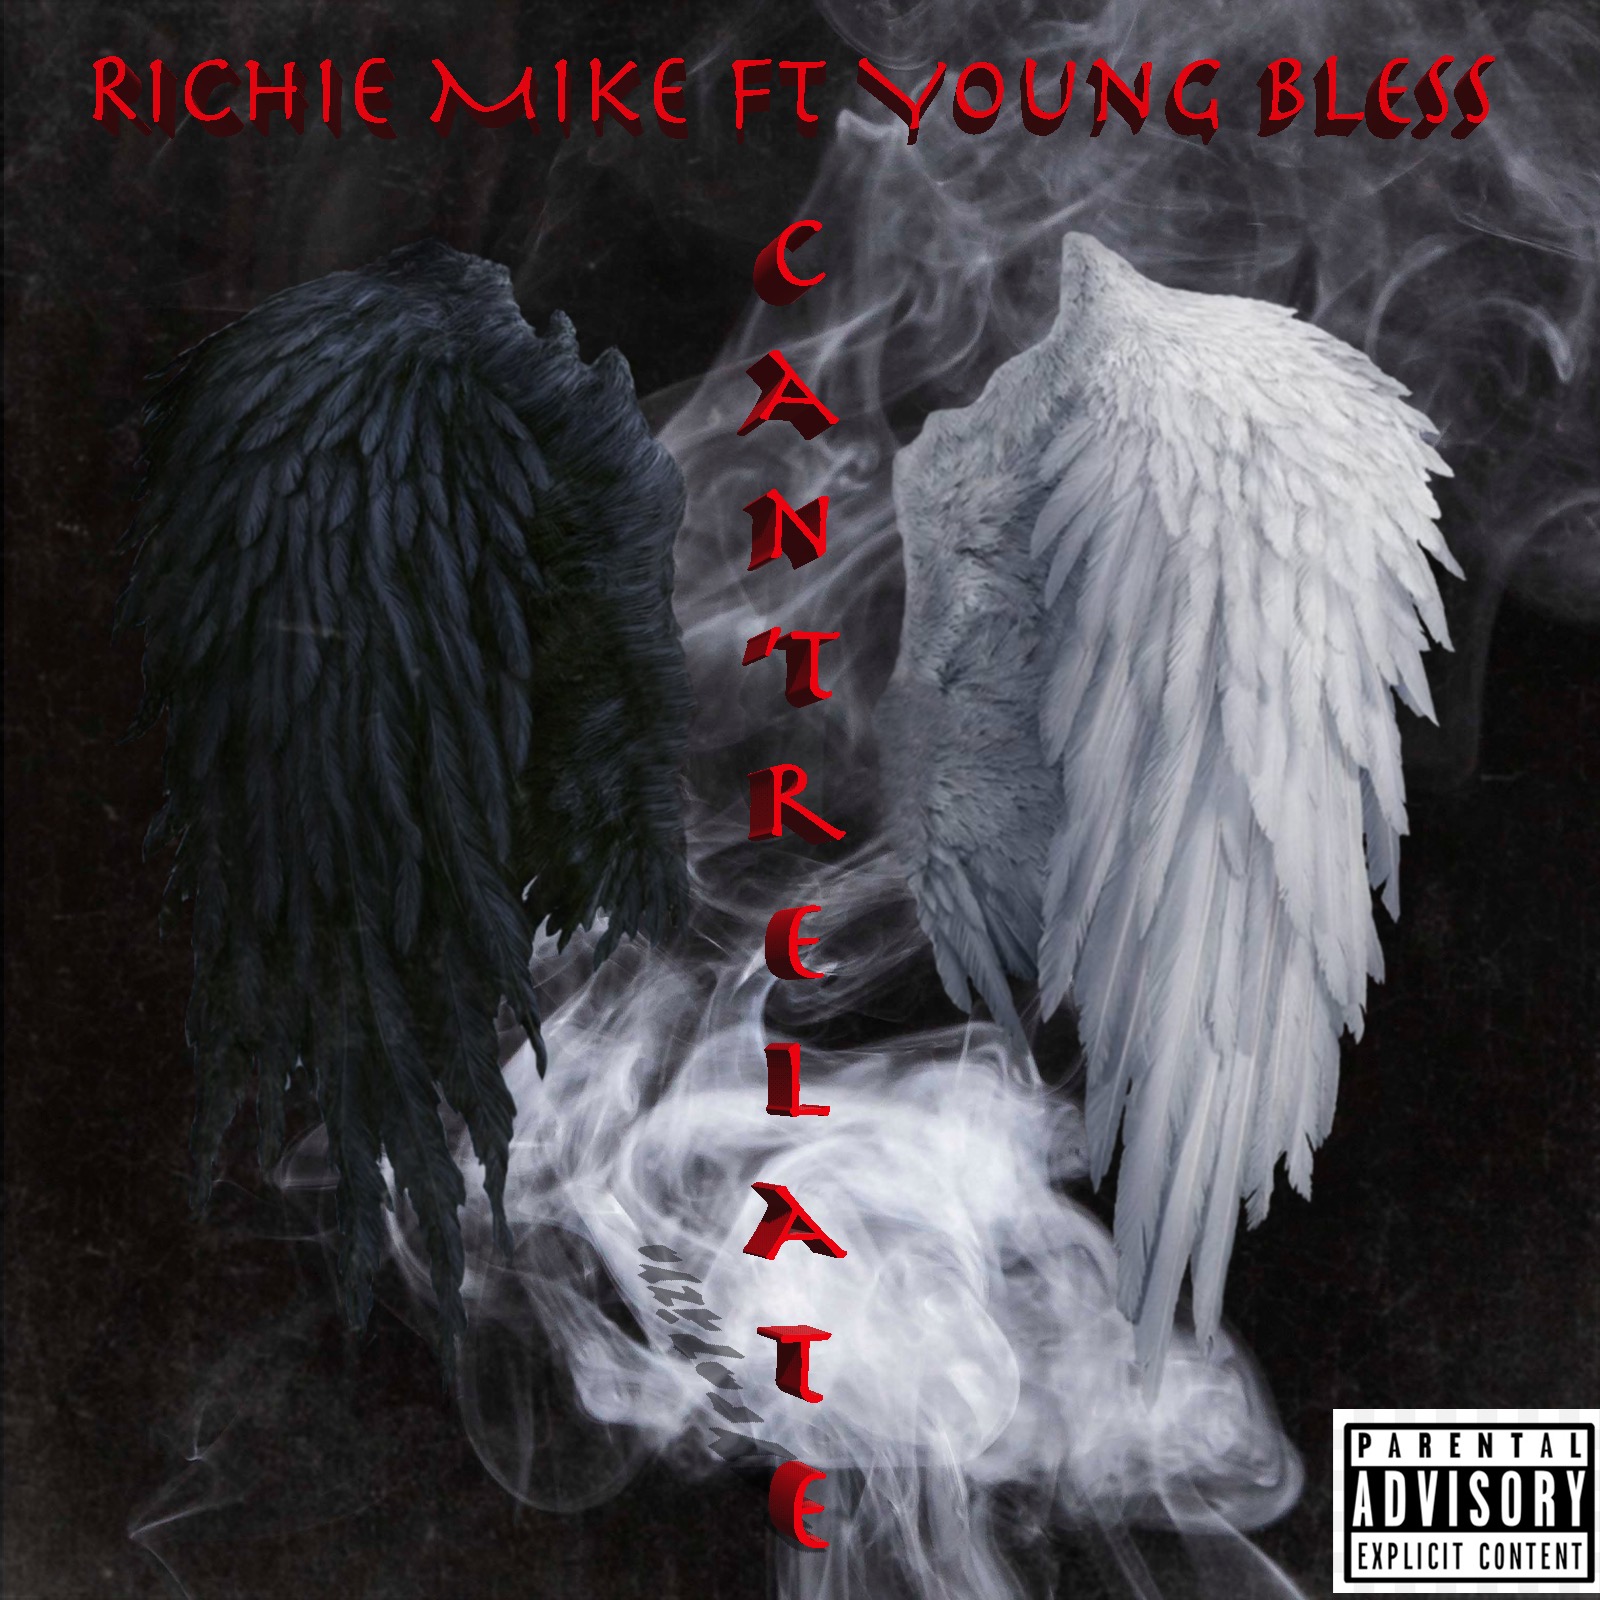 Richie Mike (@RichieMikembk) F/ Young Bless – “Can’t Relate” (Video)